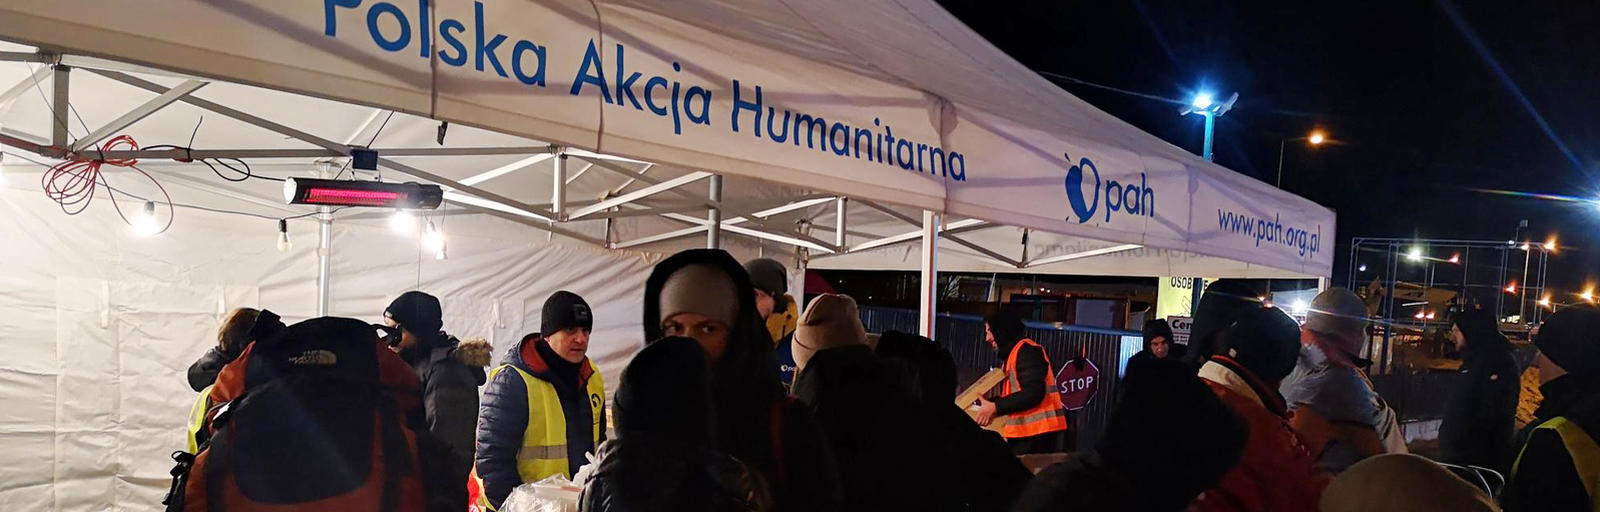 Polish Humanitarian Action staff and volunteers assist Ukrainian refugees at a border corssing in Poland.